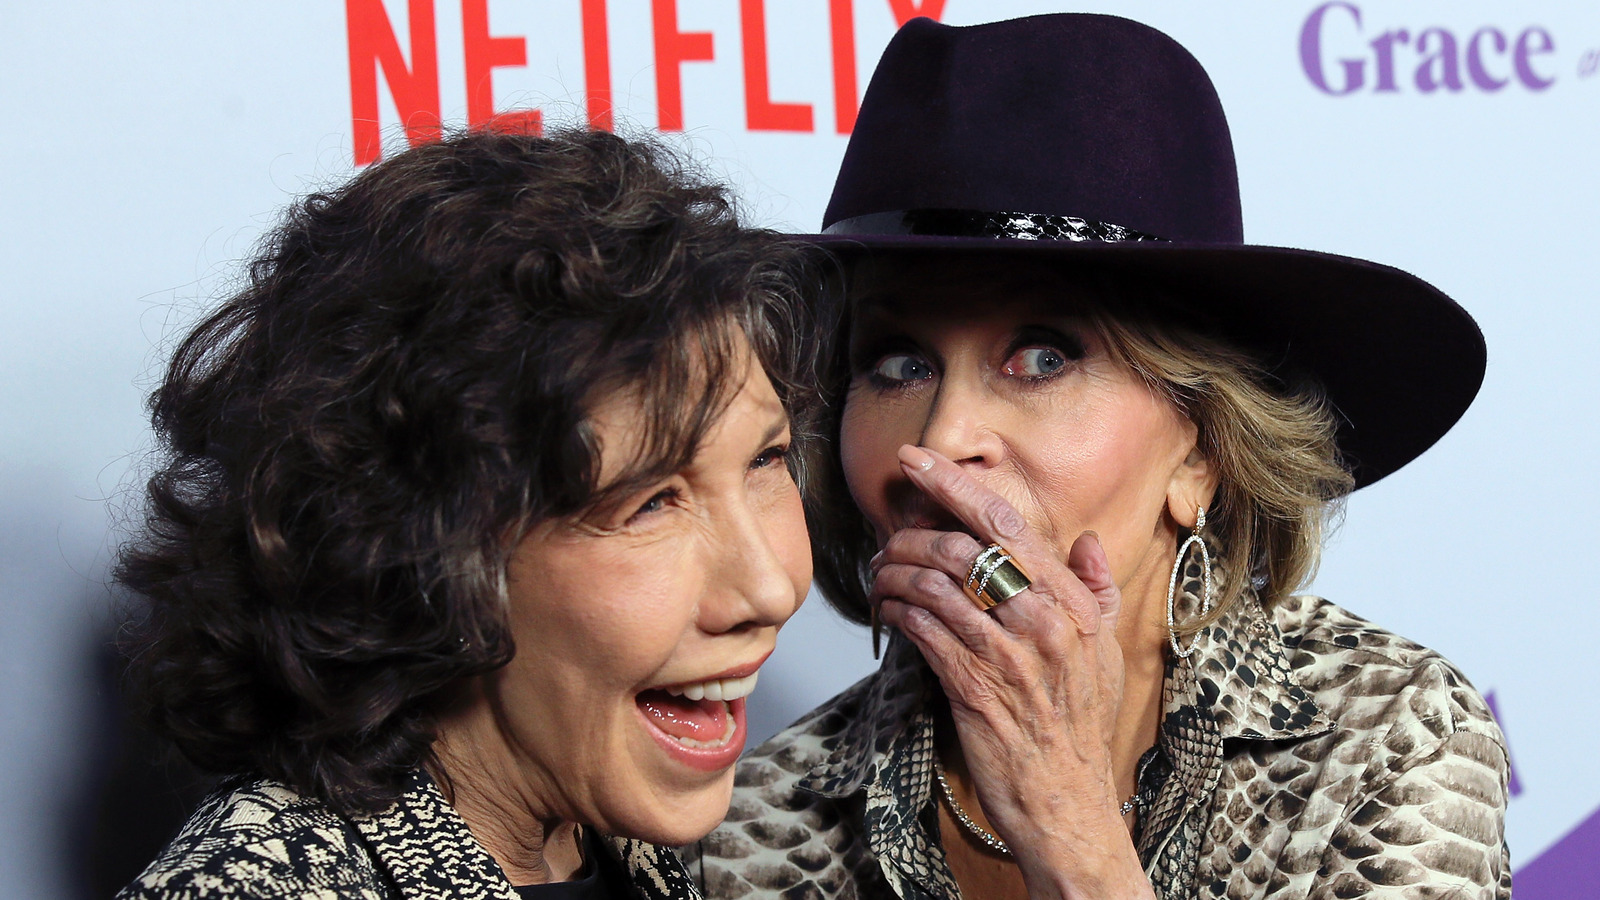 incompleet vermomming rek The Ending Of Grace And Frankie Finally Explained